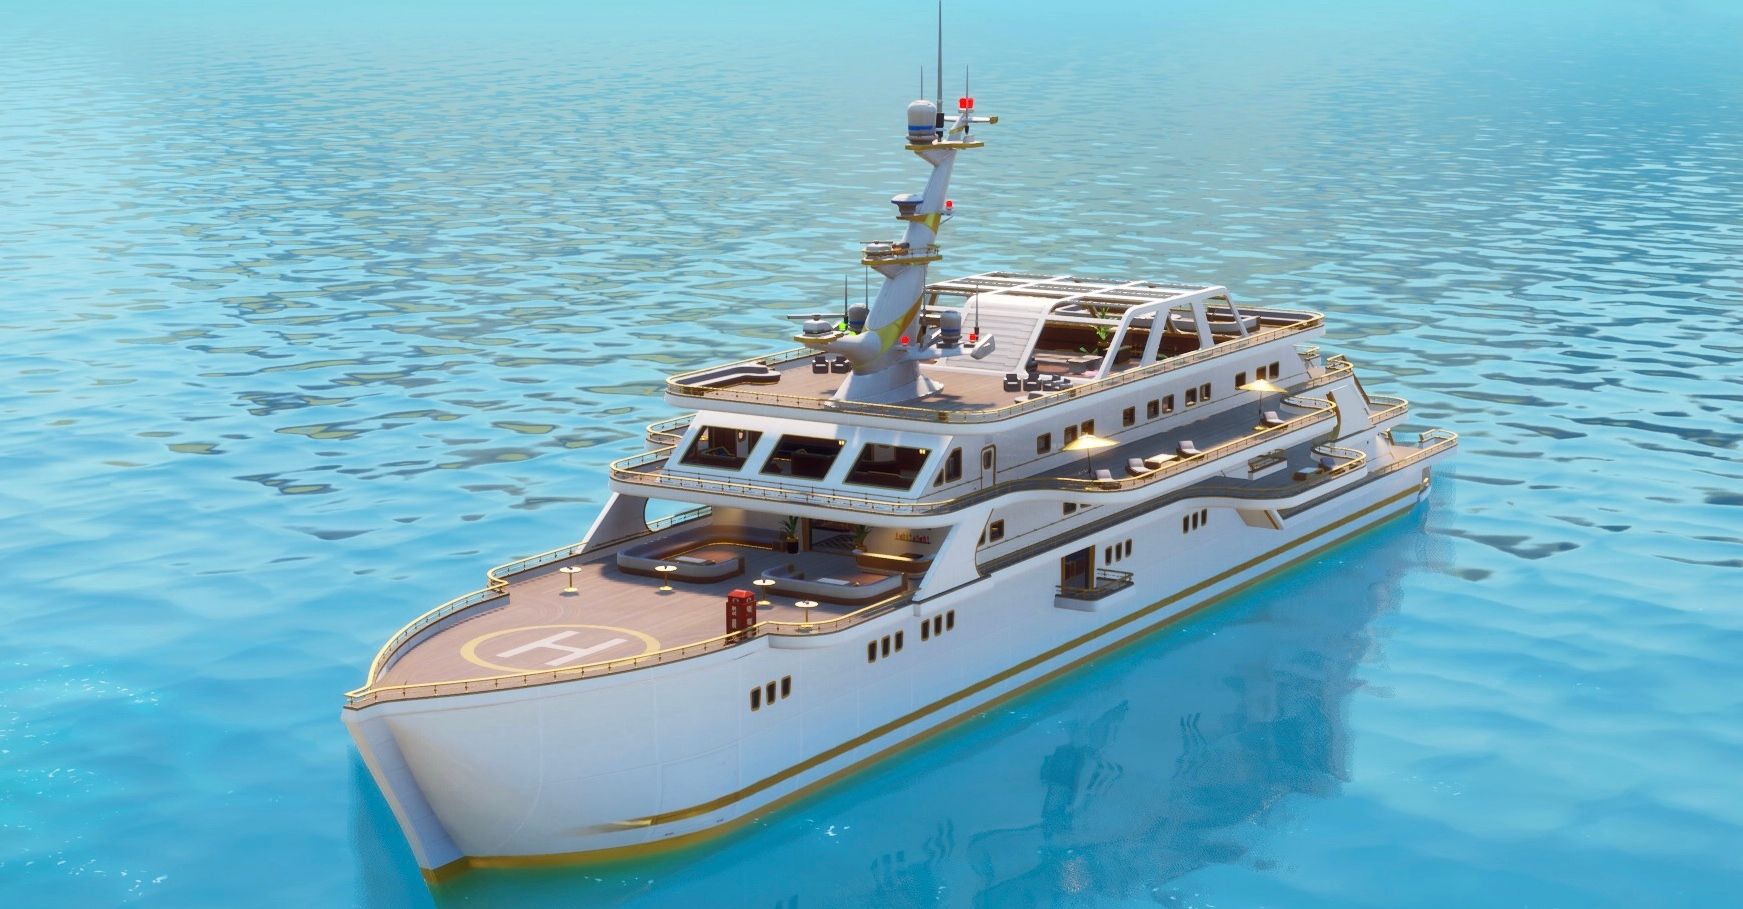 The Yacht Location in Fortnite